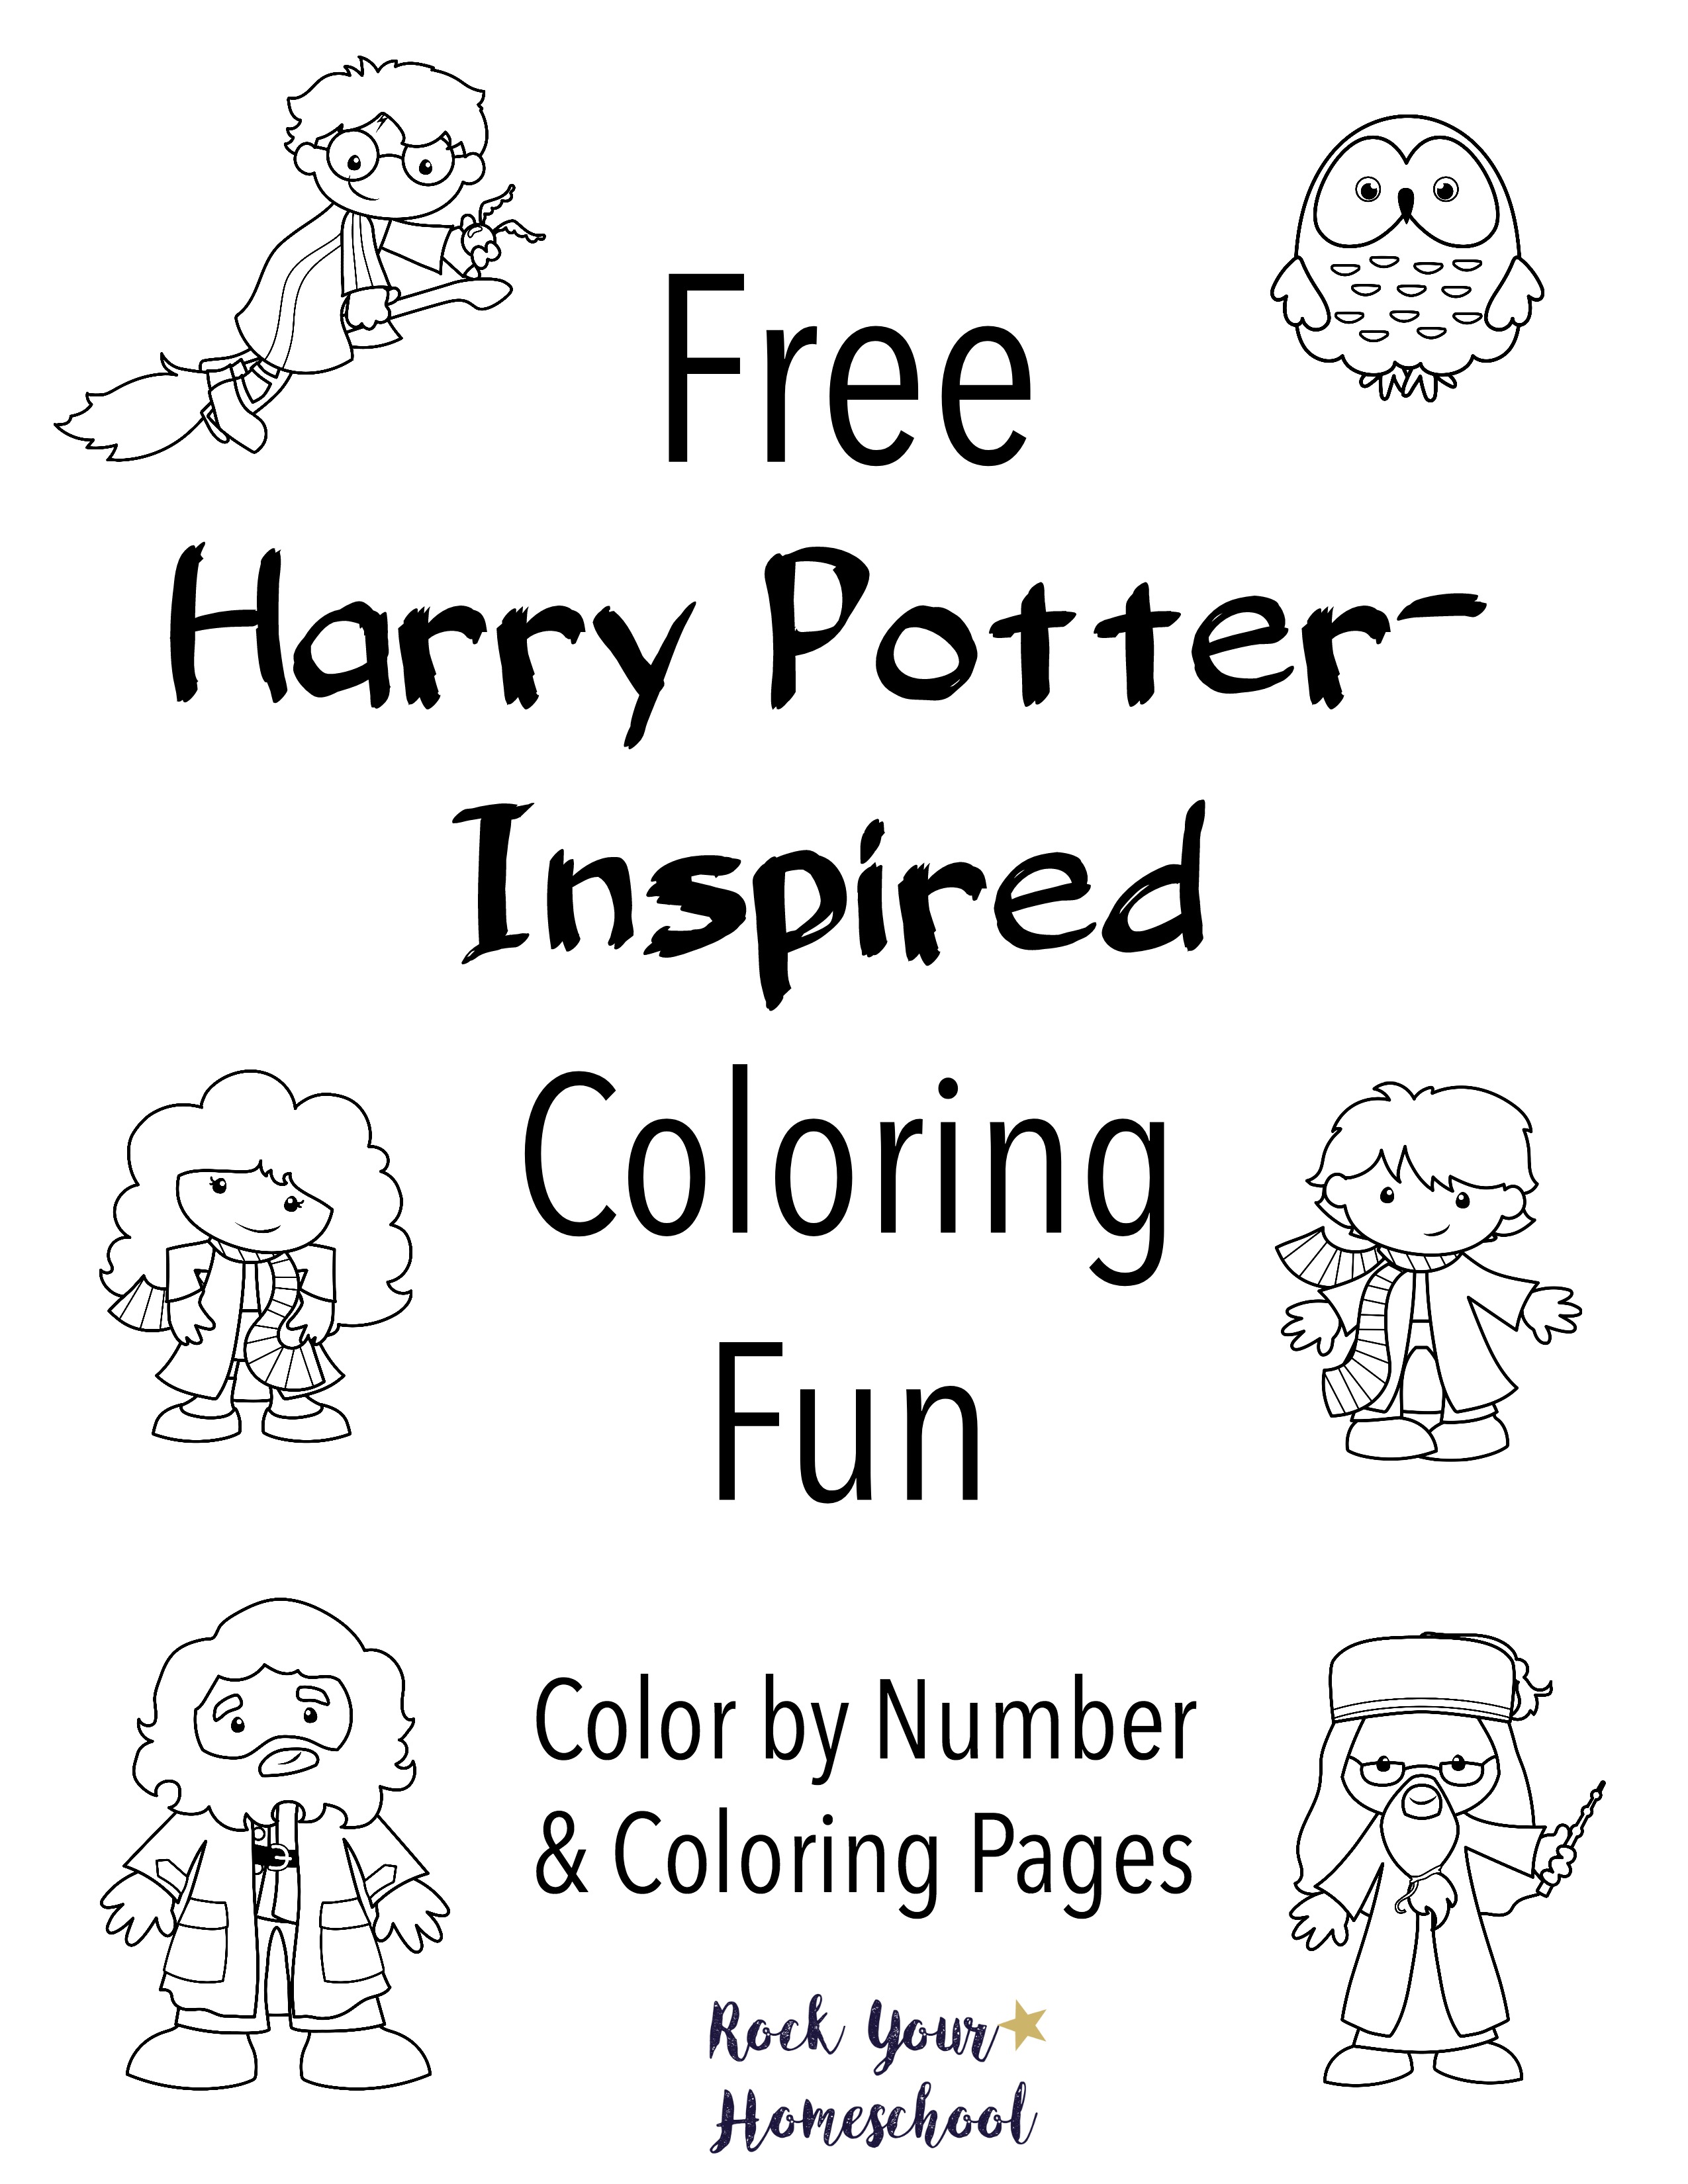 Ravenclaw Crest Coloring Pages at GetColorings.com | Free ...